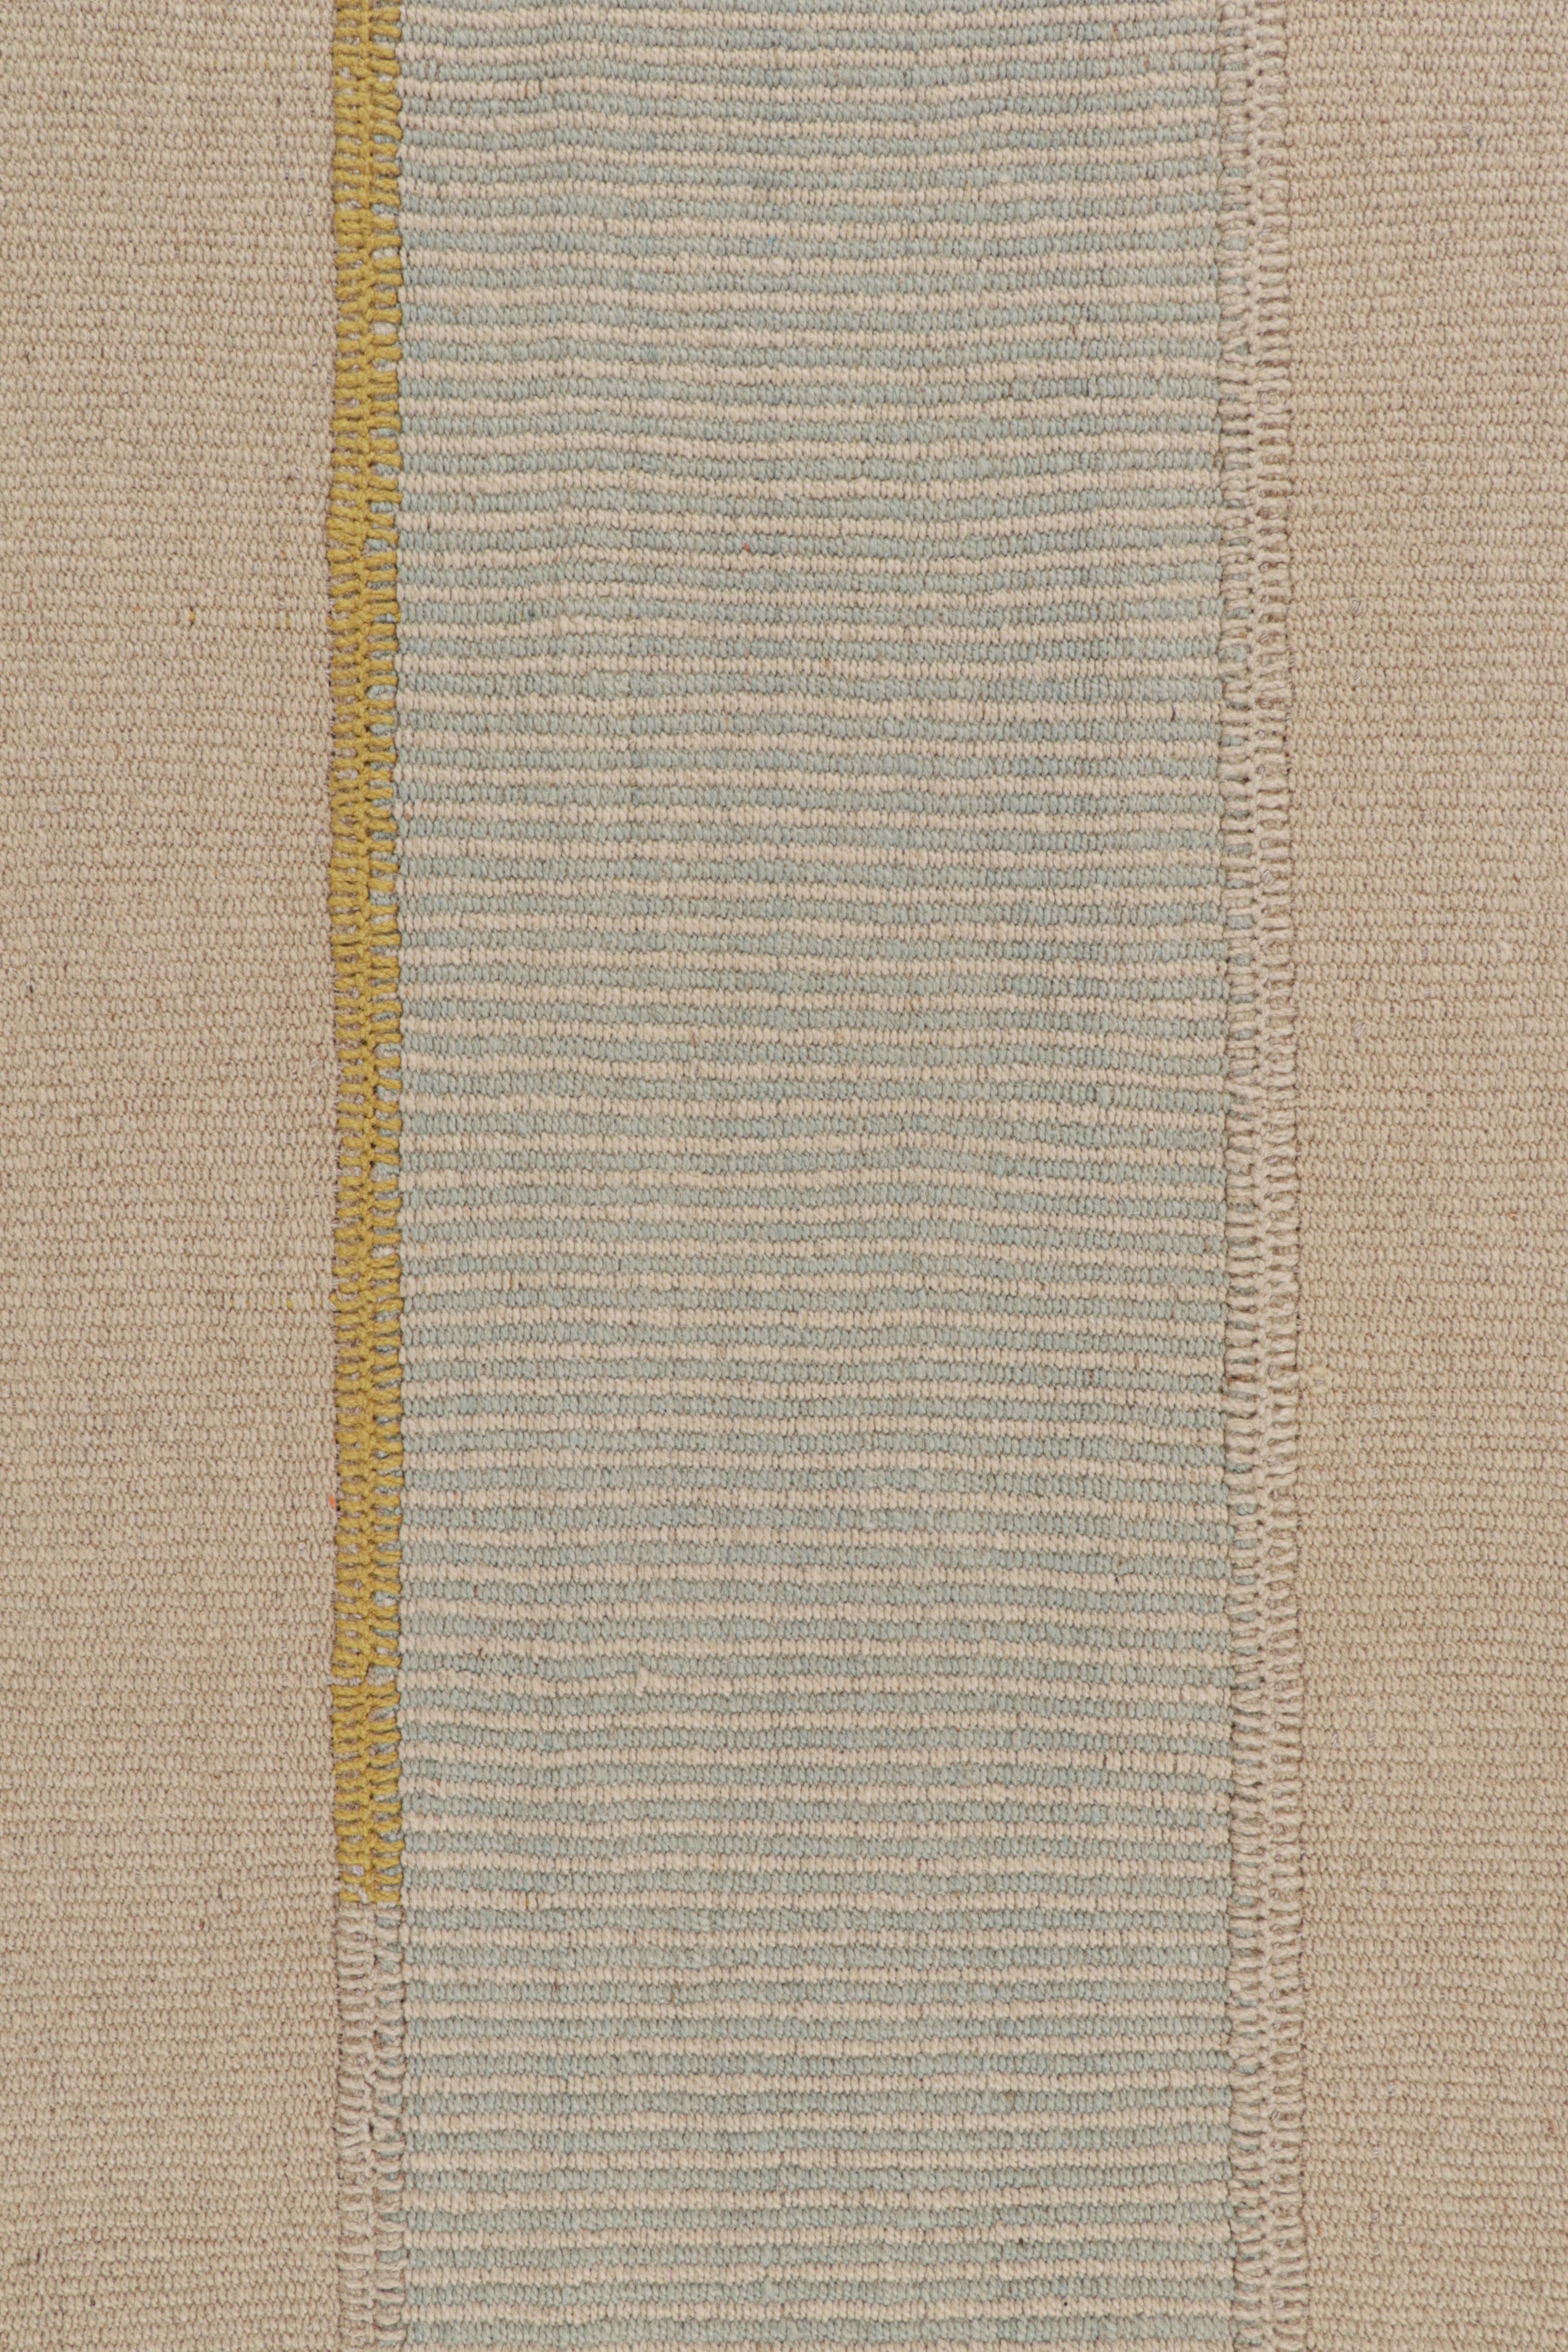 Rug & Kilim’s Contemporary Kilim in Beige, Blue & Gold Stripes In New Condition For Sale In Long Island City, NY